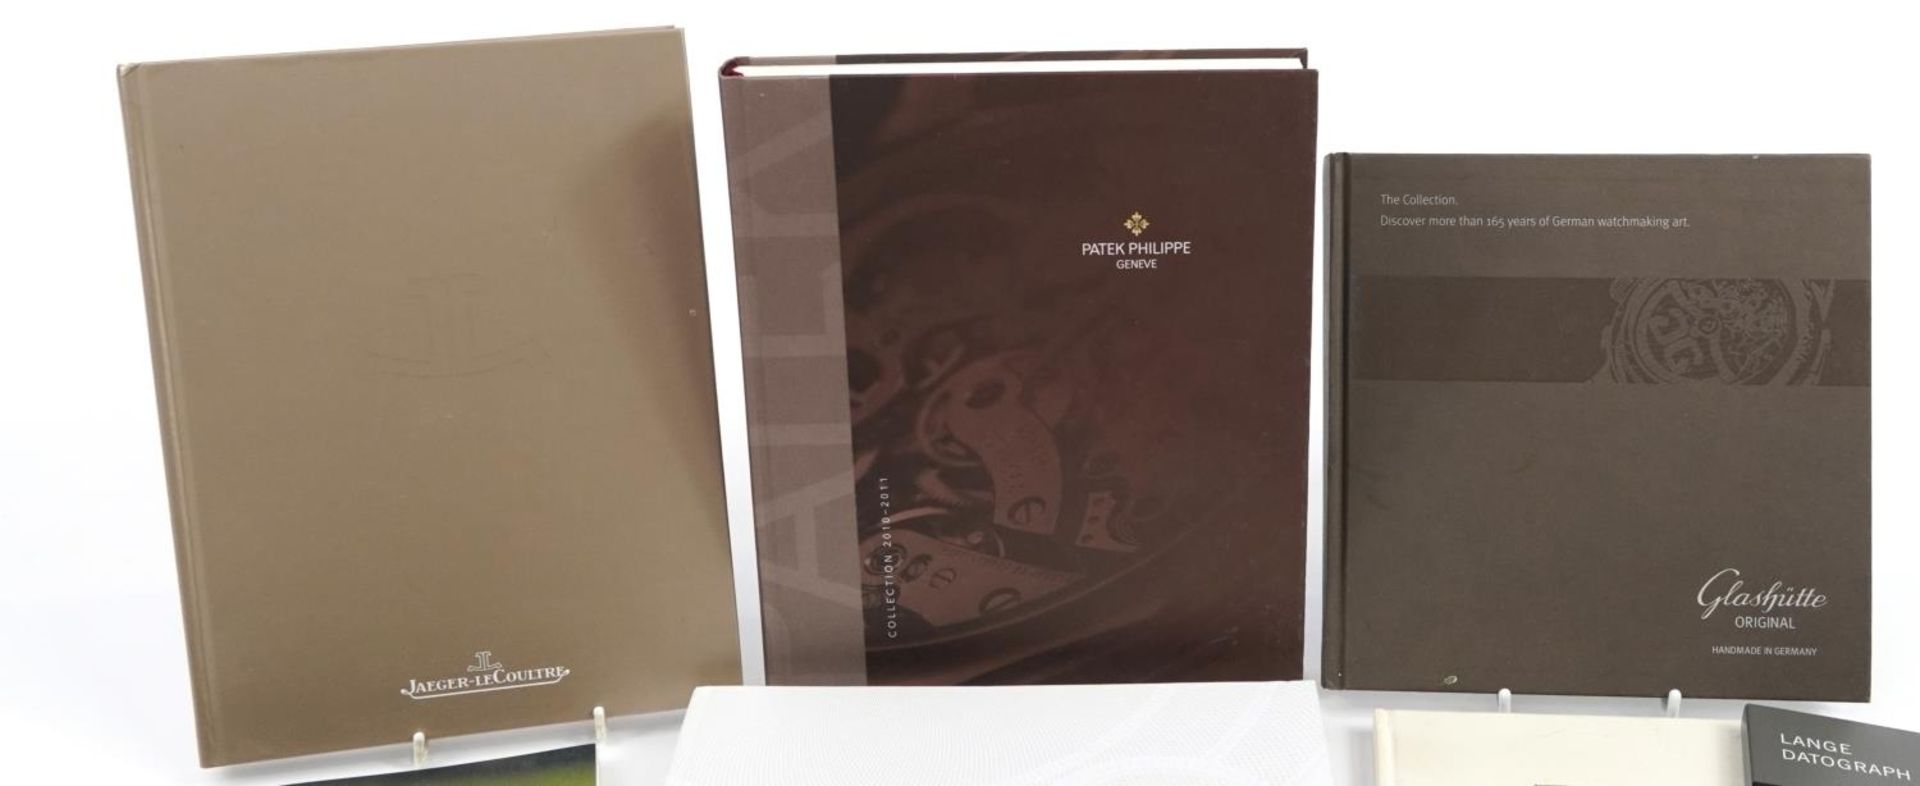 Watch related reference books including Jaeger-LeCoultre, Omega and Patek Philippe - Image 2 of 3